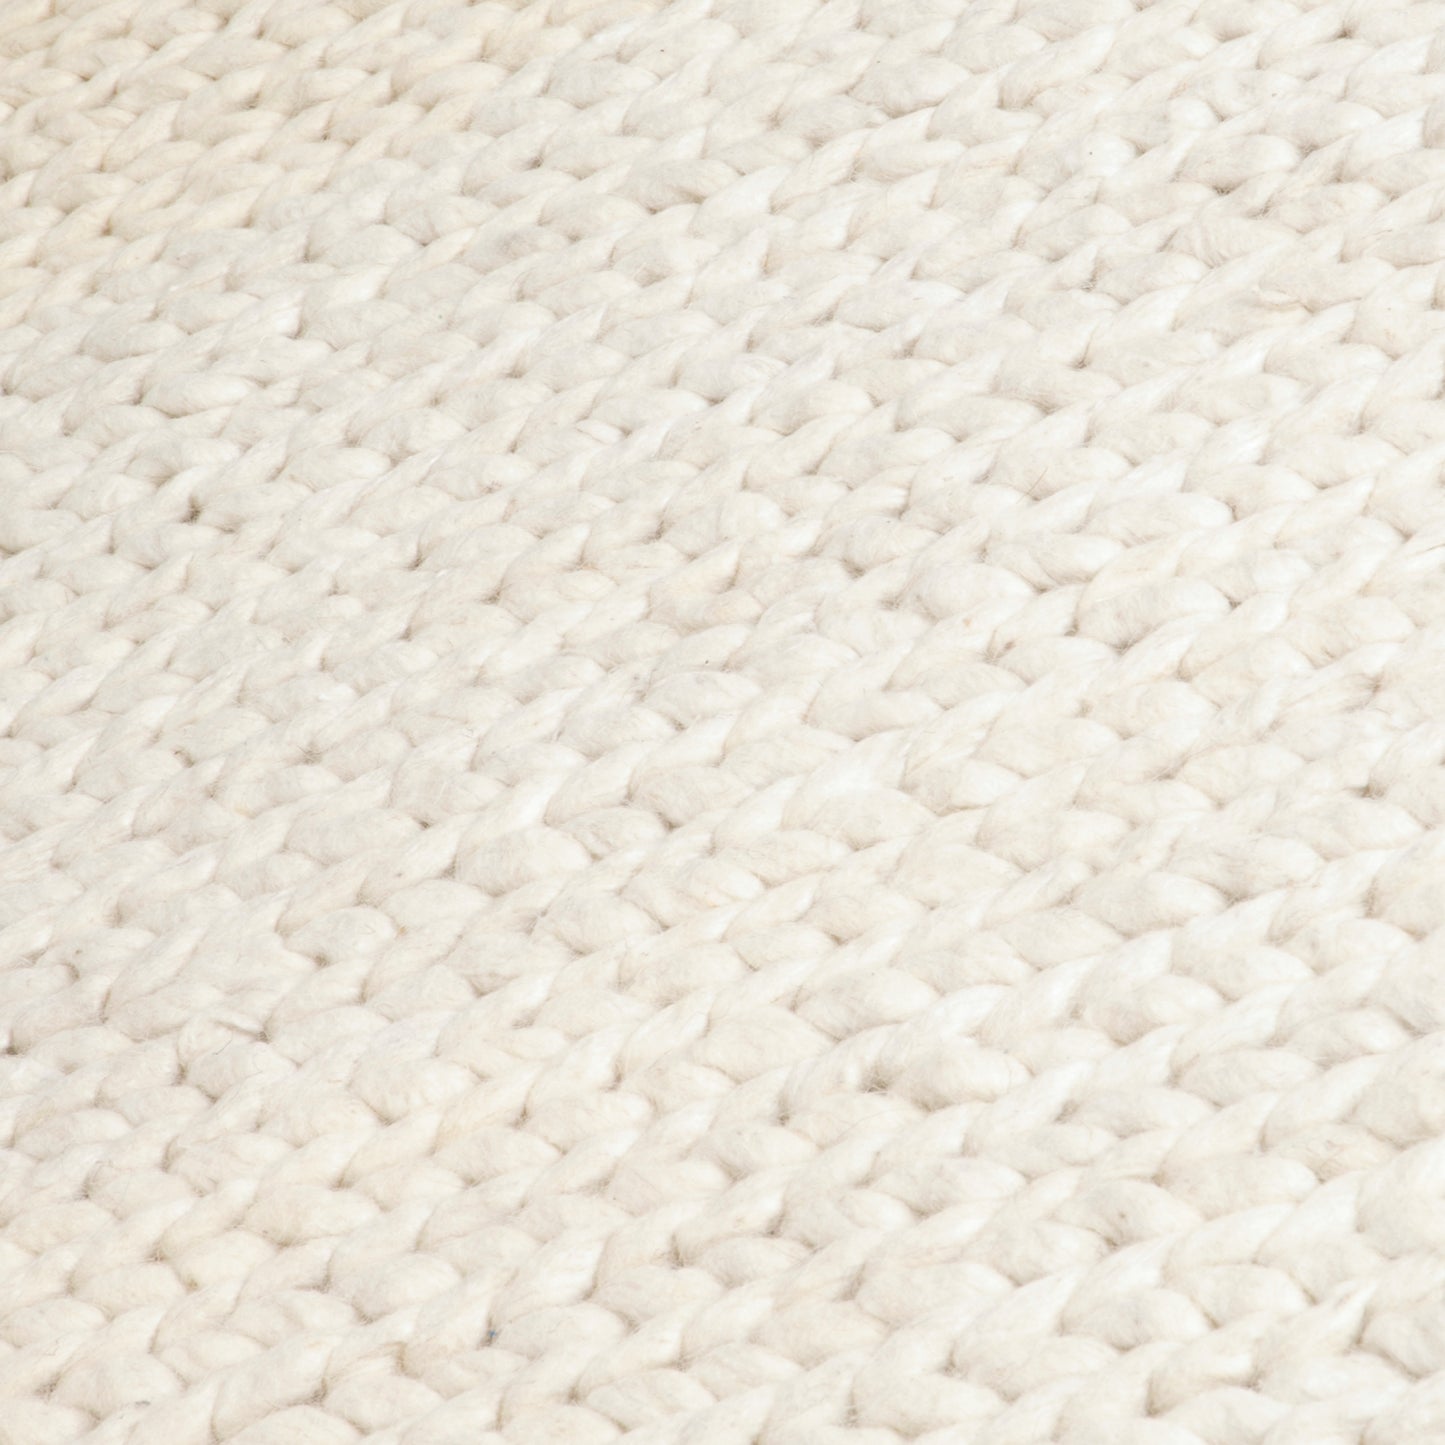 Cream knitted wool rug by Native